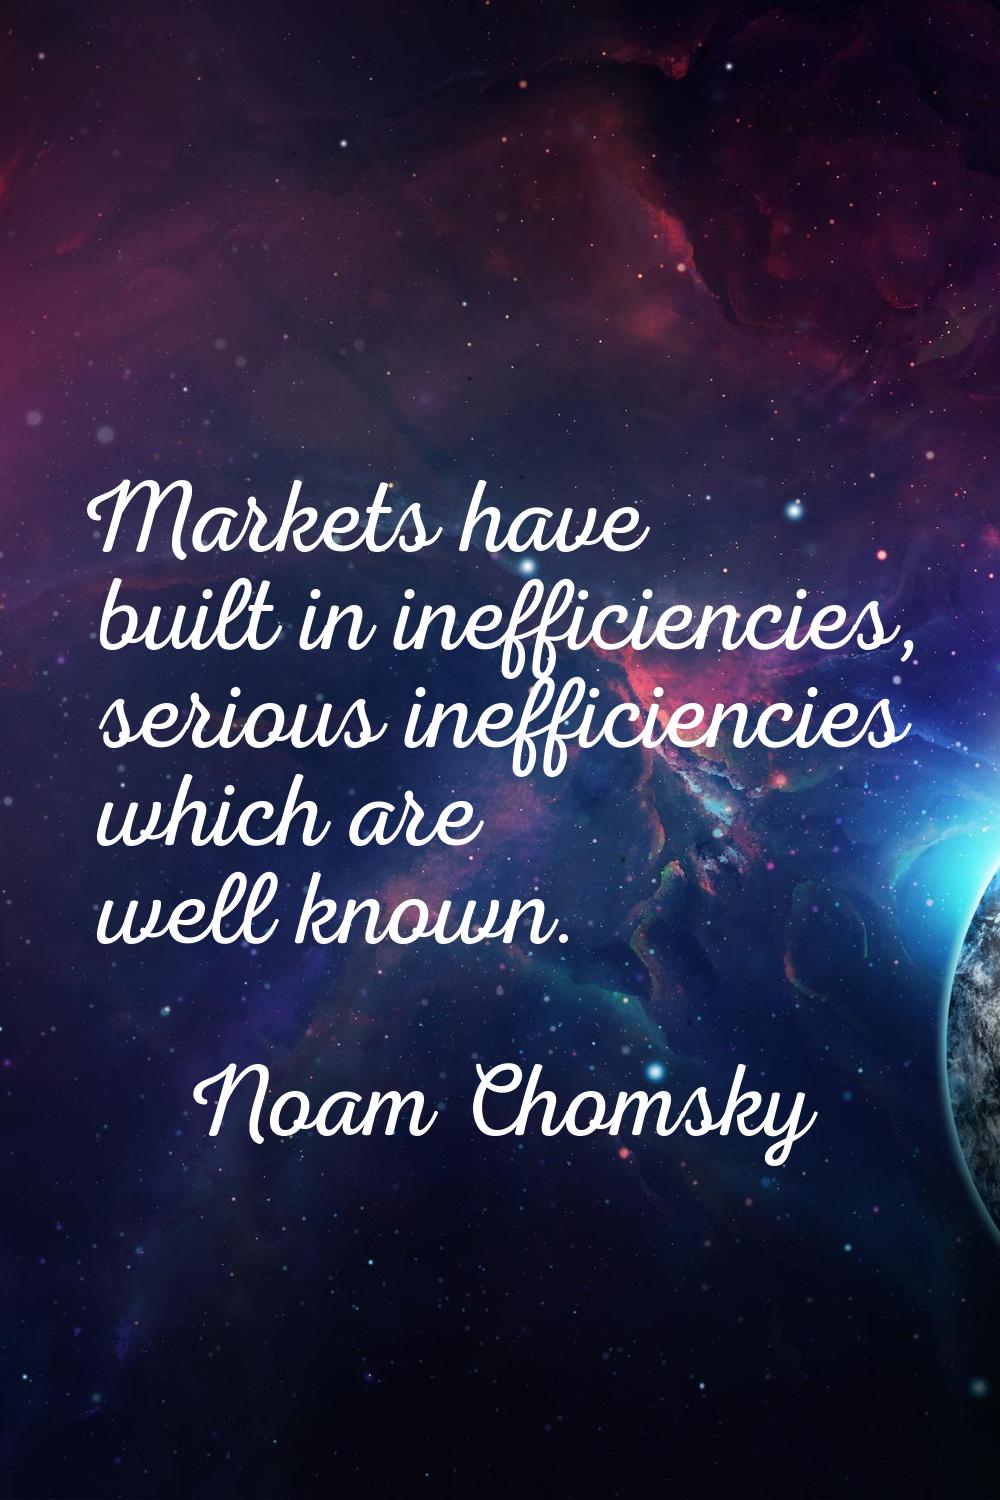 Markets have built in inefficiencies, serious inefficiencies which are well known.